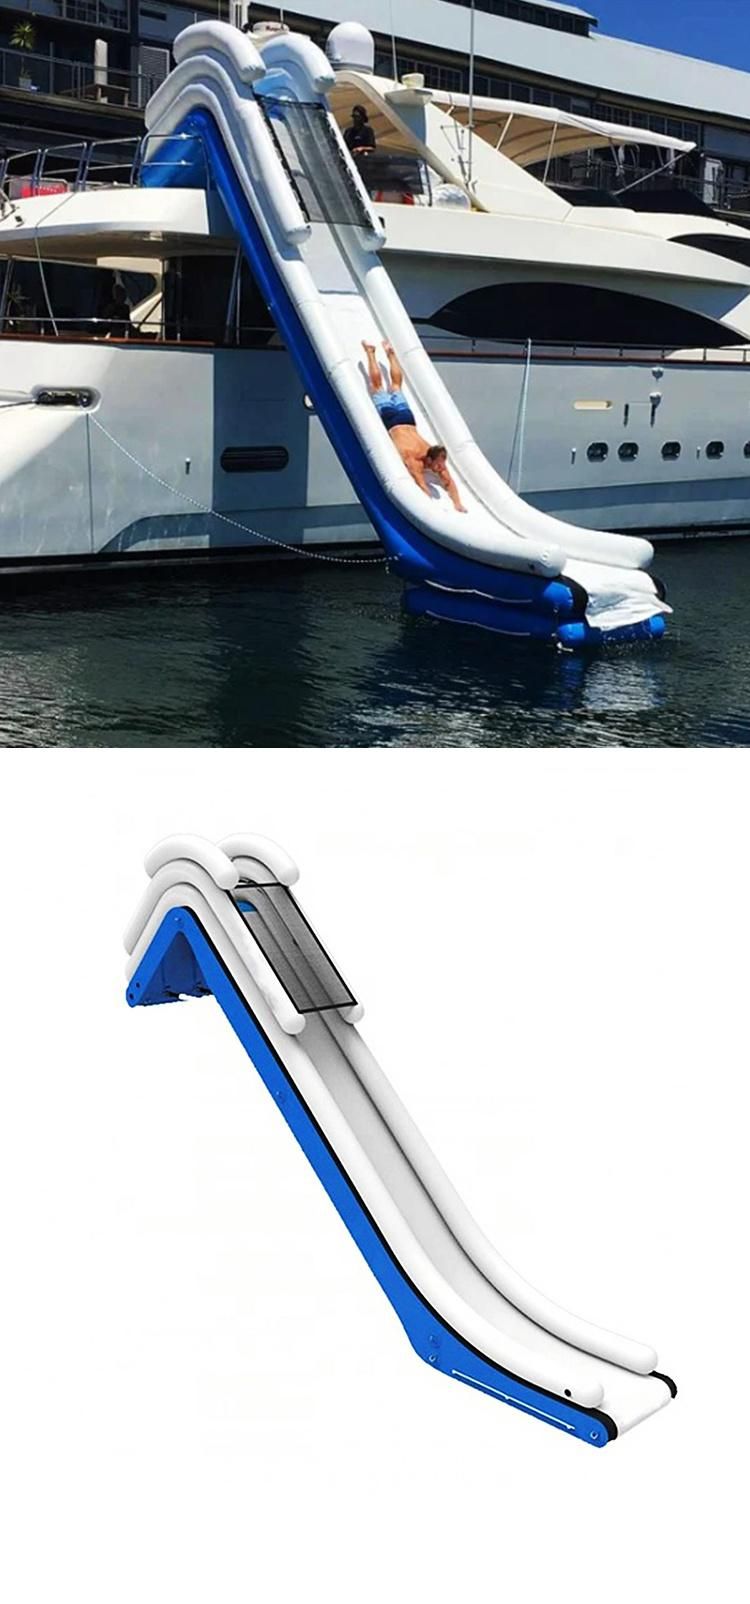 Water Slide Inflatable Yacht Slide for Boat Outdoor Marine Games